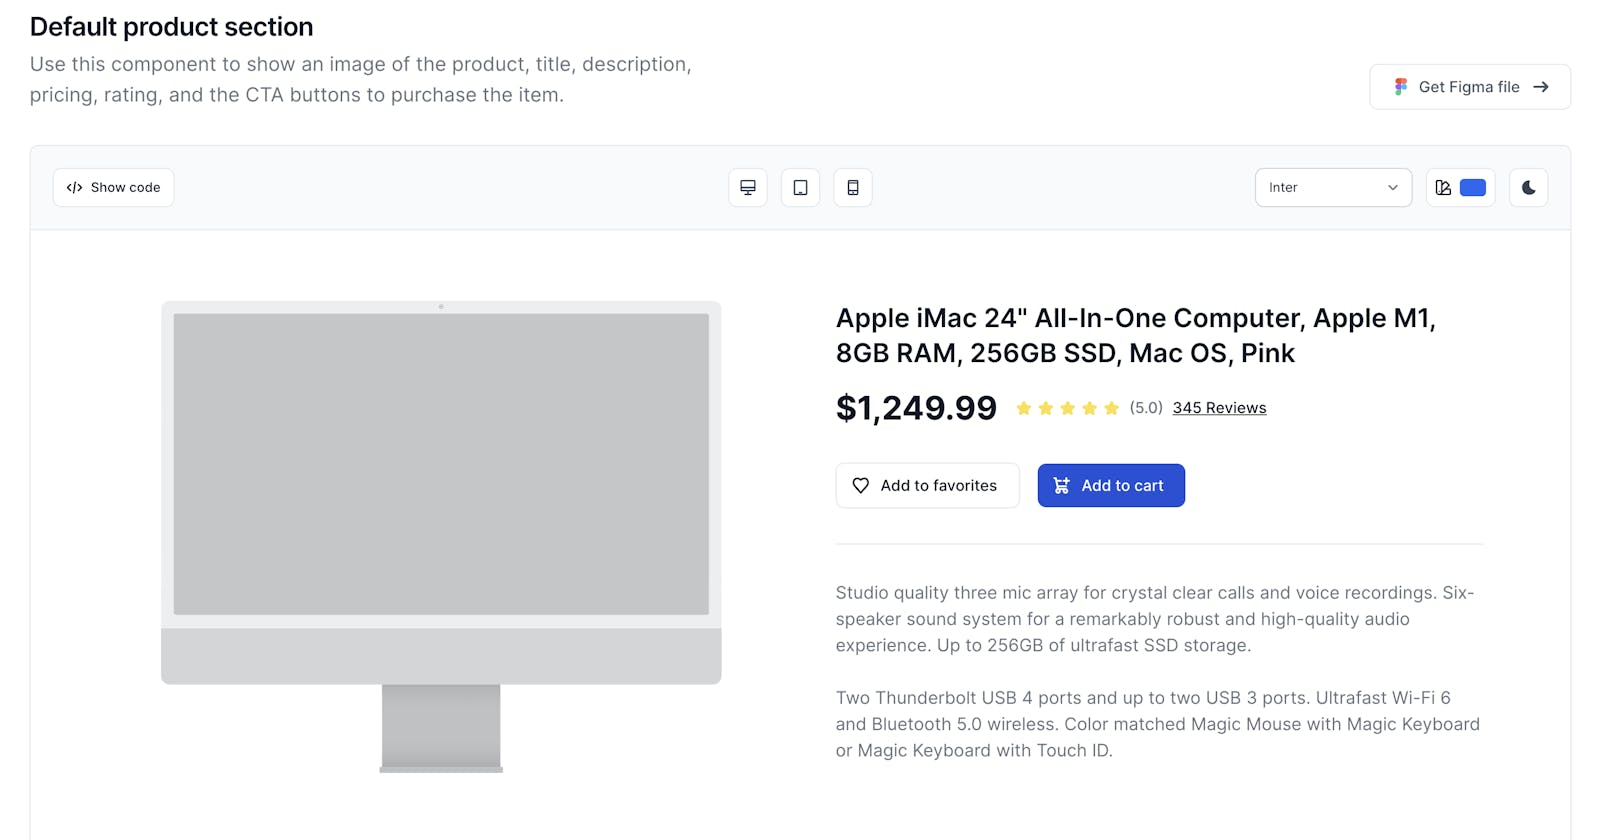 Product overview component examples built with Flowbite and Tailwind CSS for E-commerce